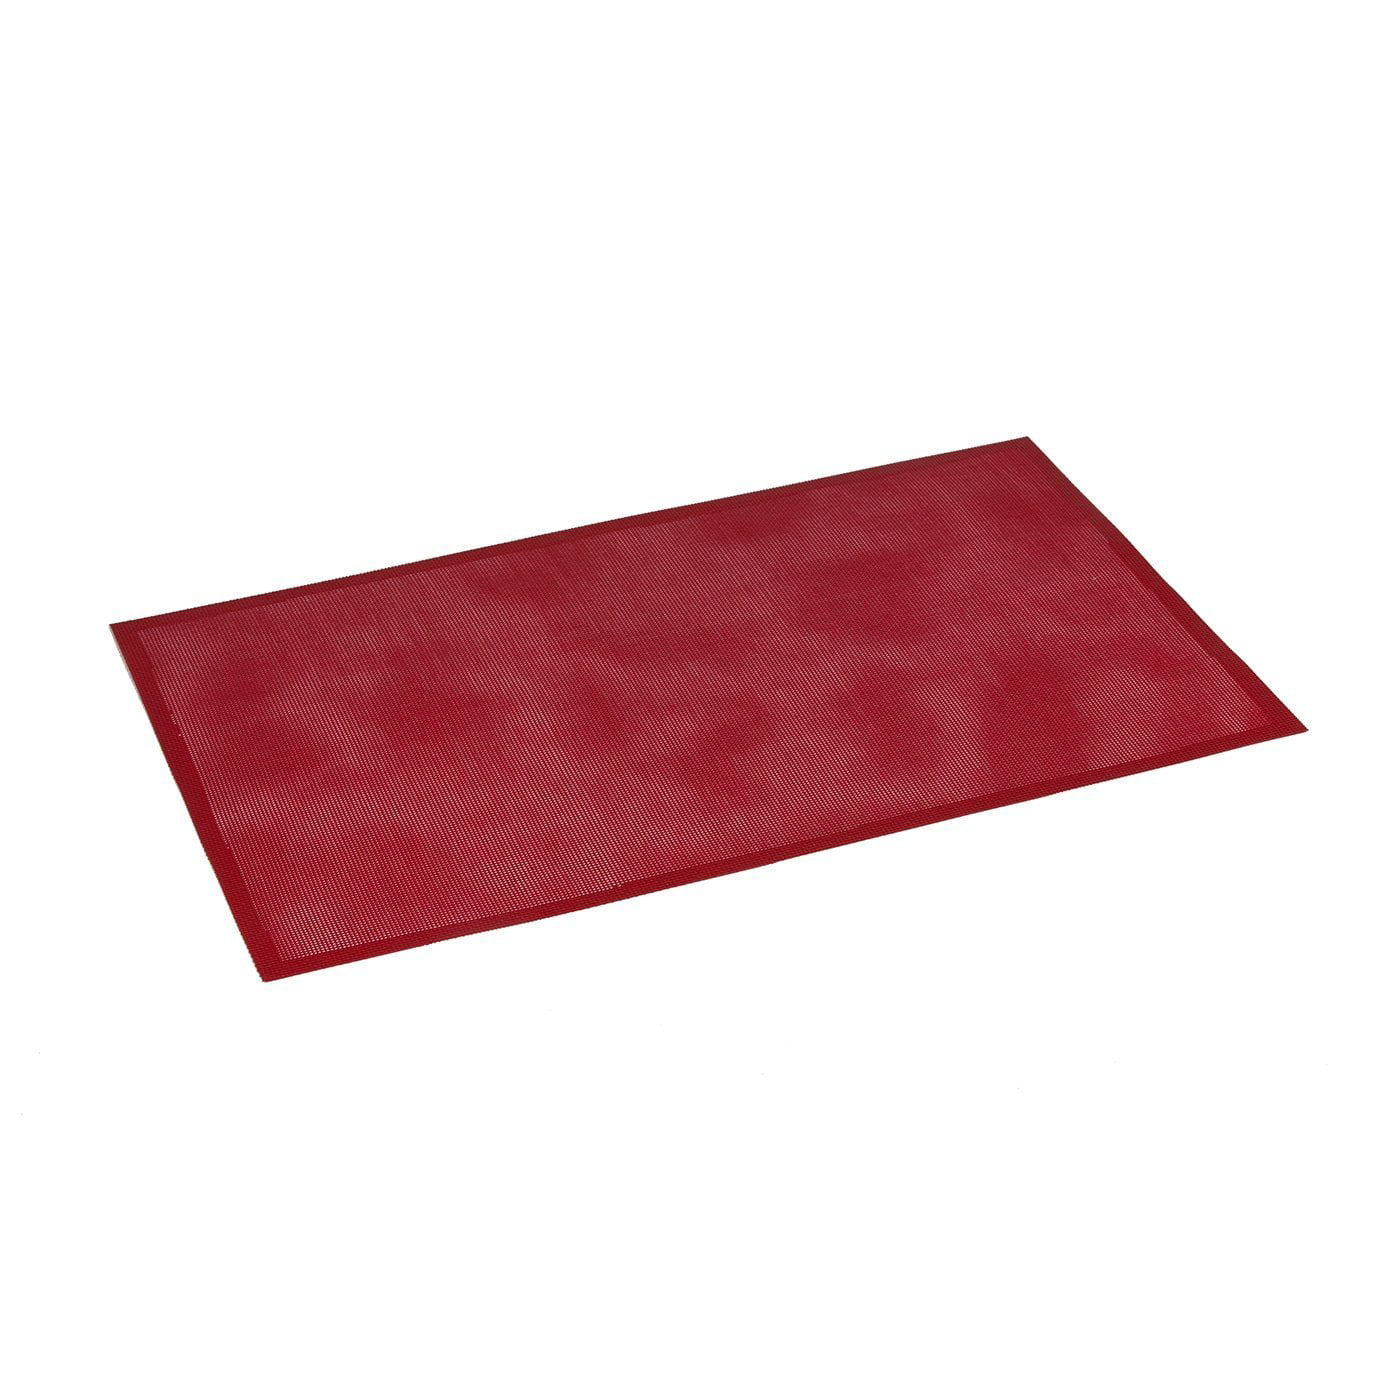 Red PE Silicone Cooking Mat 